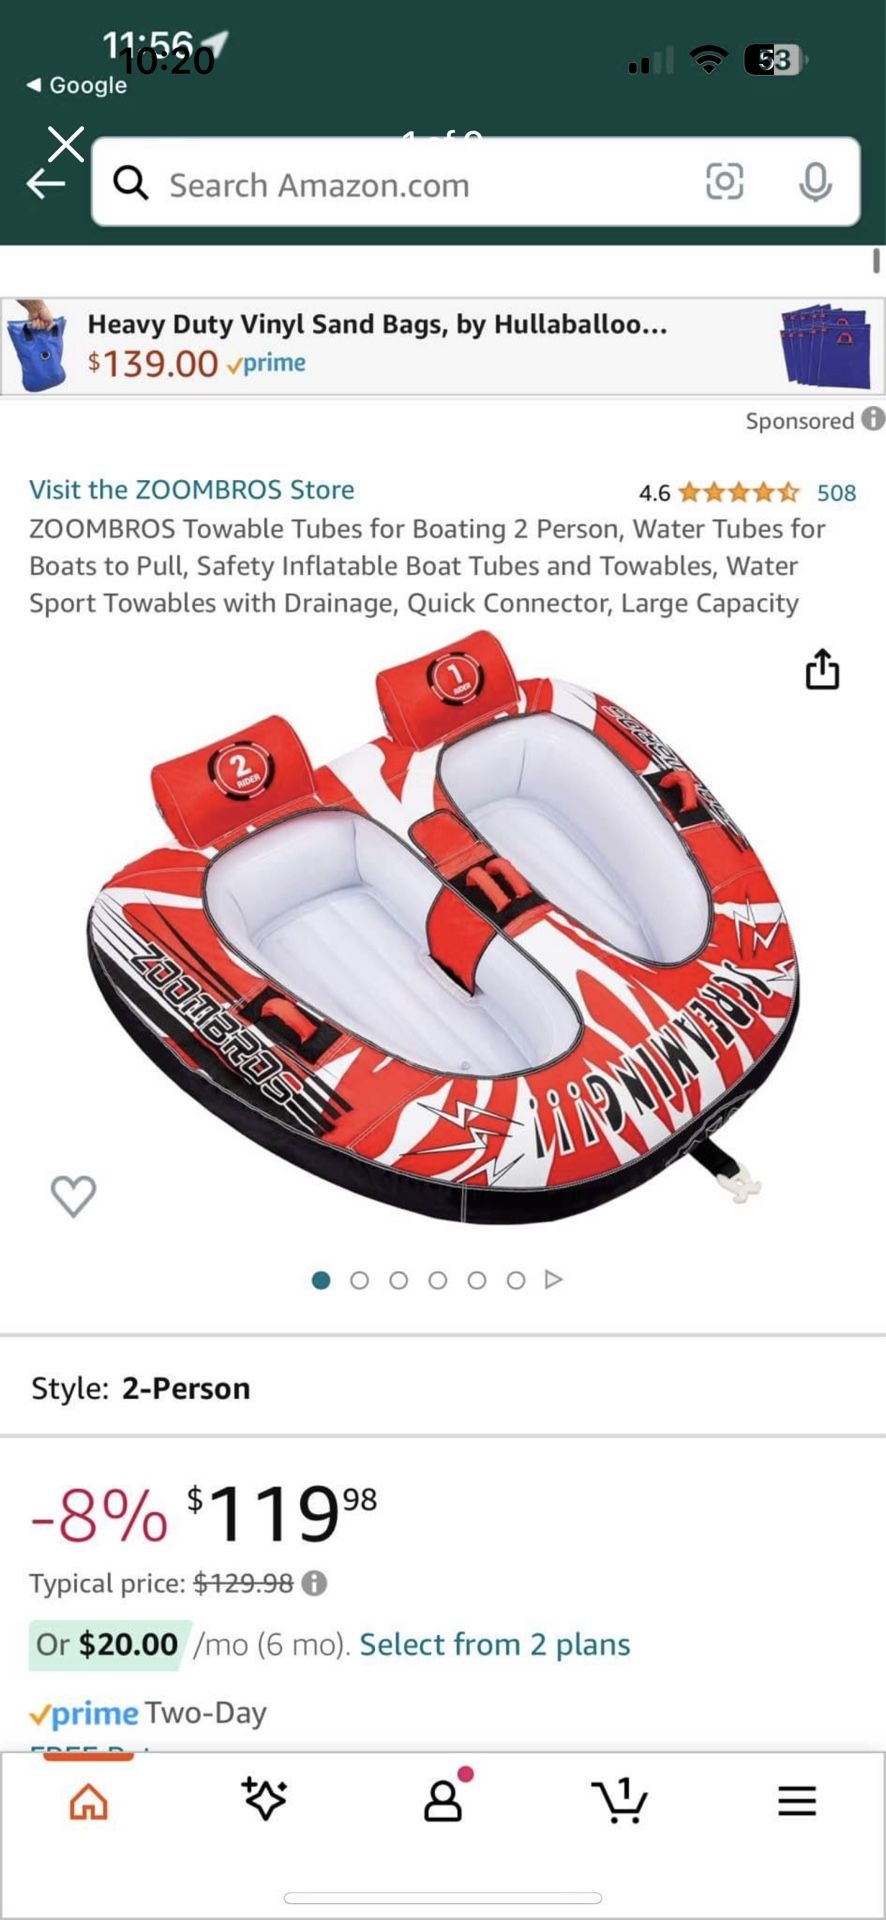 Brand New Large, Two Person Towable Inflatable Still In The Original Packaging With No Damage Whatsoever